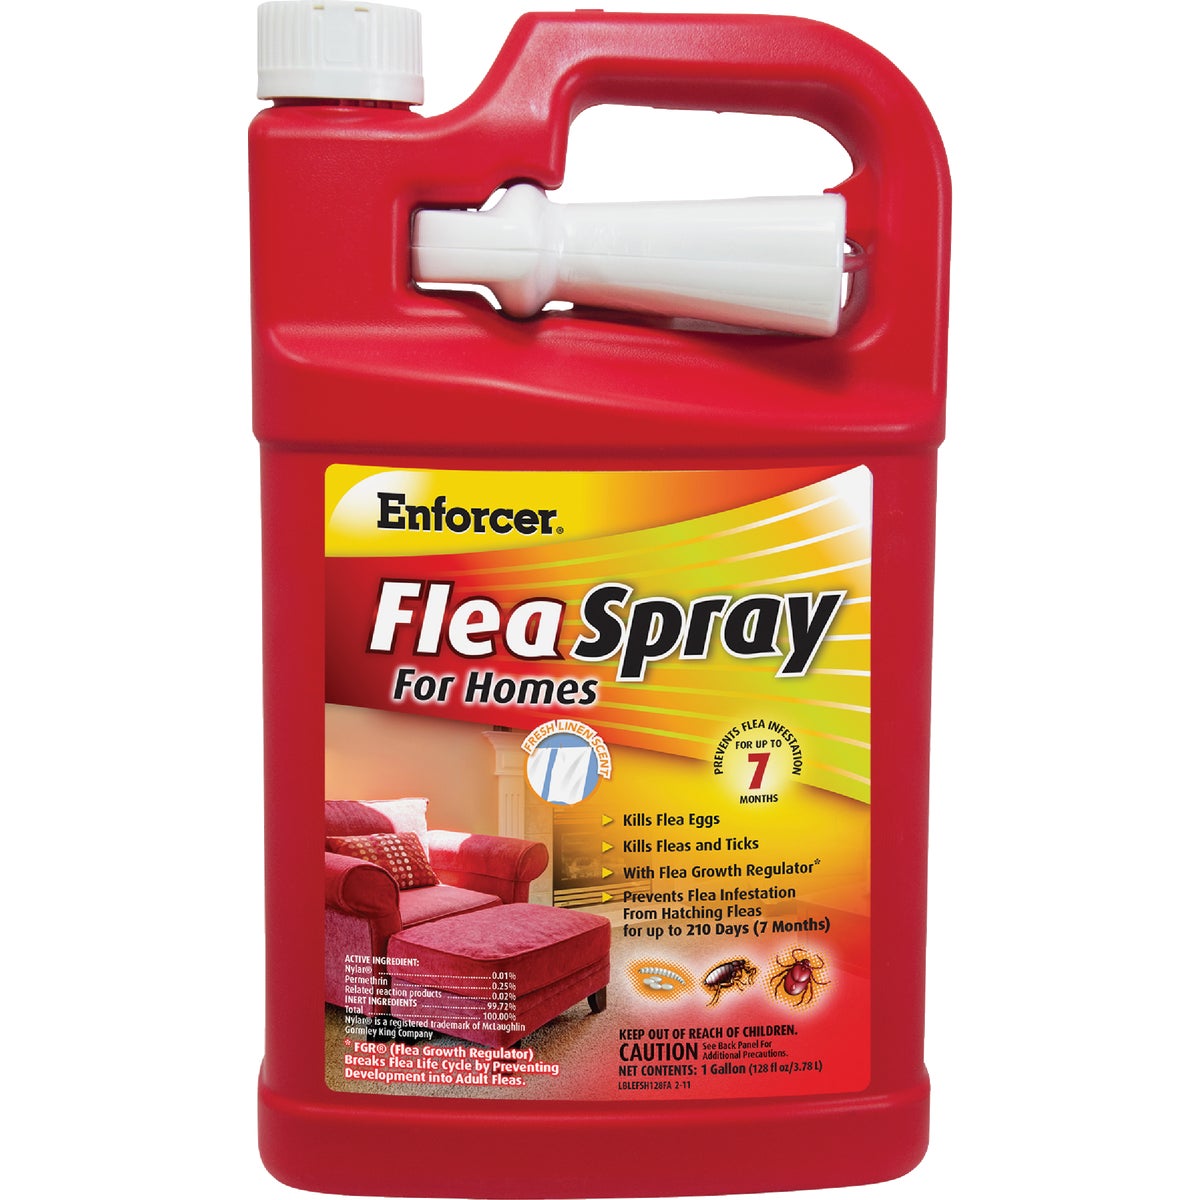 Item 758167, Flea spray for use in homes, garages, attics, apartments, and hotels.